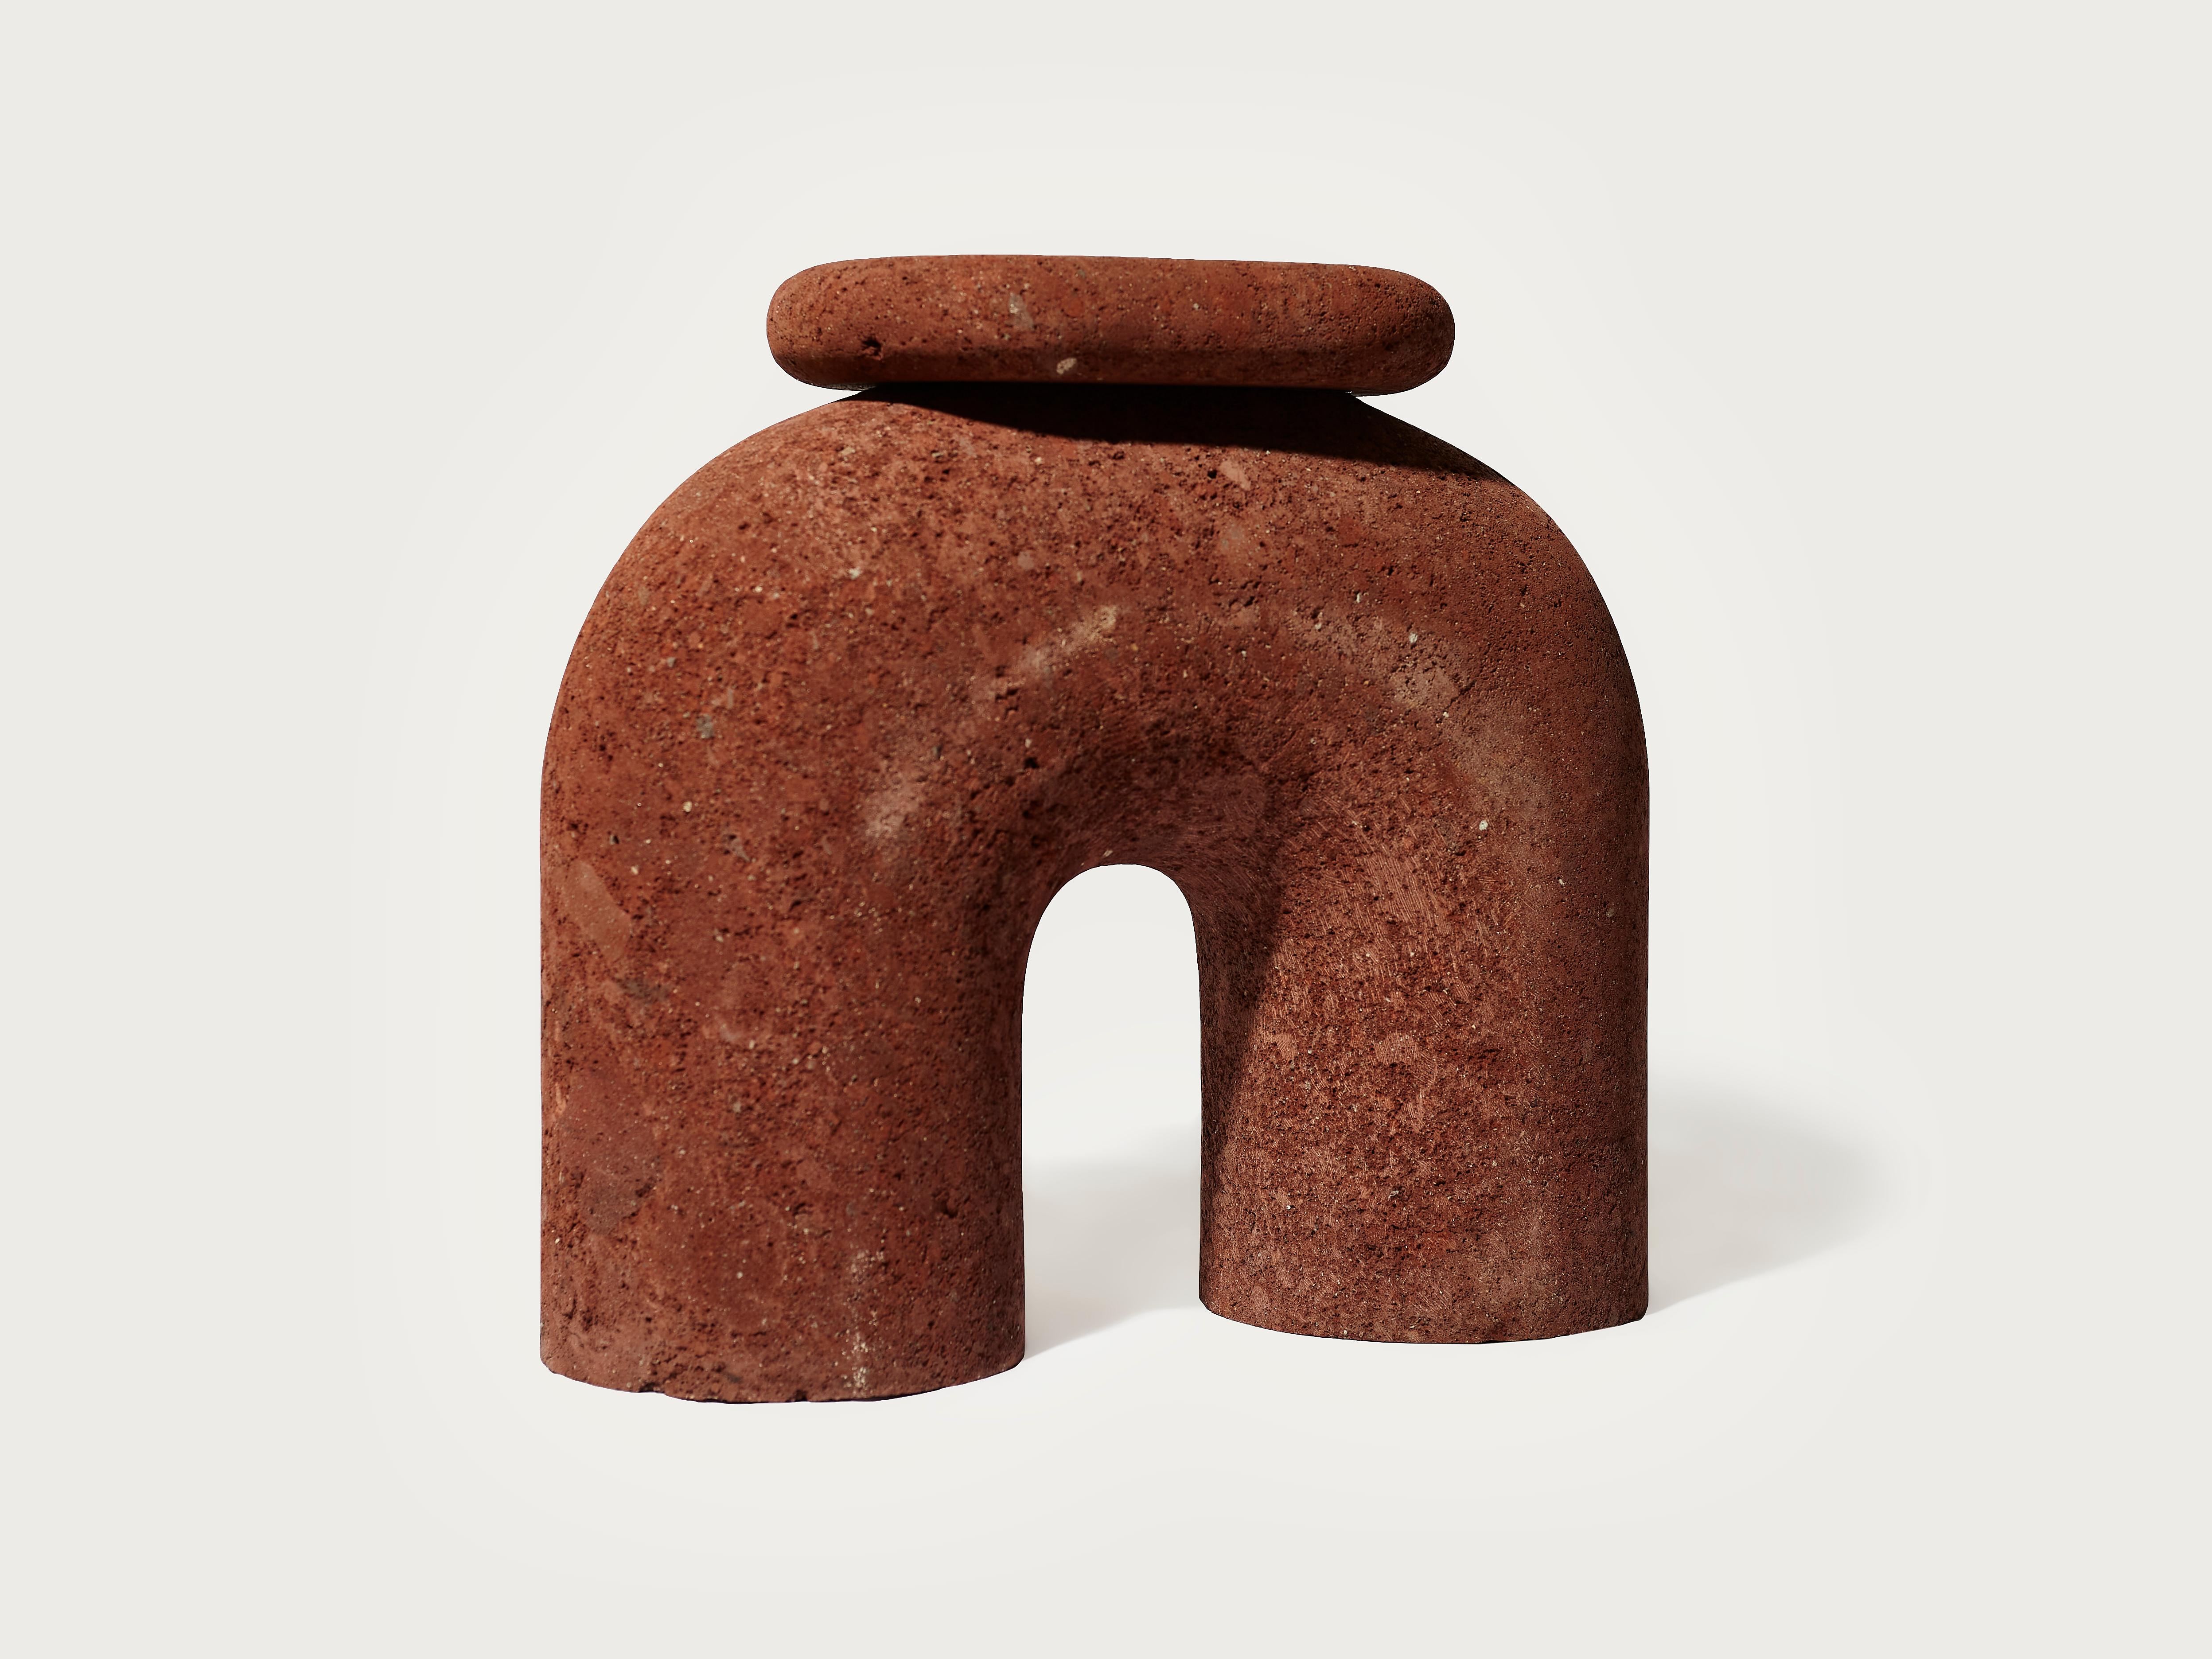 Neolithic Thinker is a stool hand sculpted from red tezontle stone, a highly oxidized and porous volcanic rock endemic to Mexico. Its design draws from different historical references coming together in an syncretic form that is at once primitive,